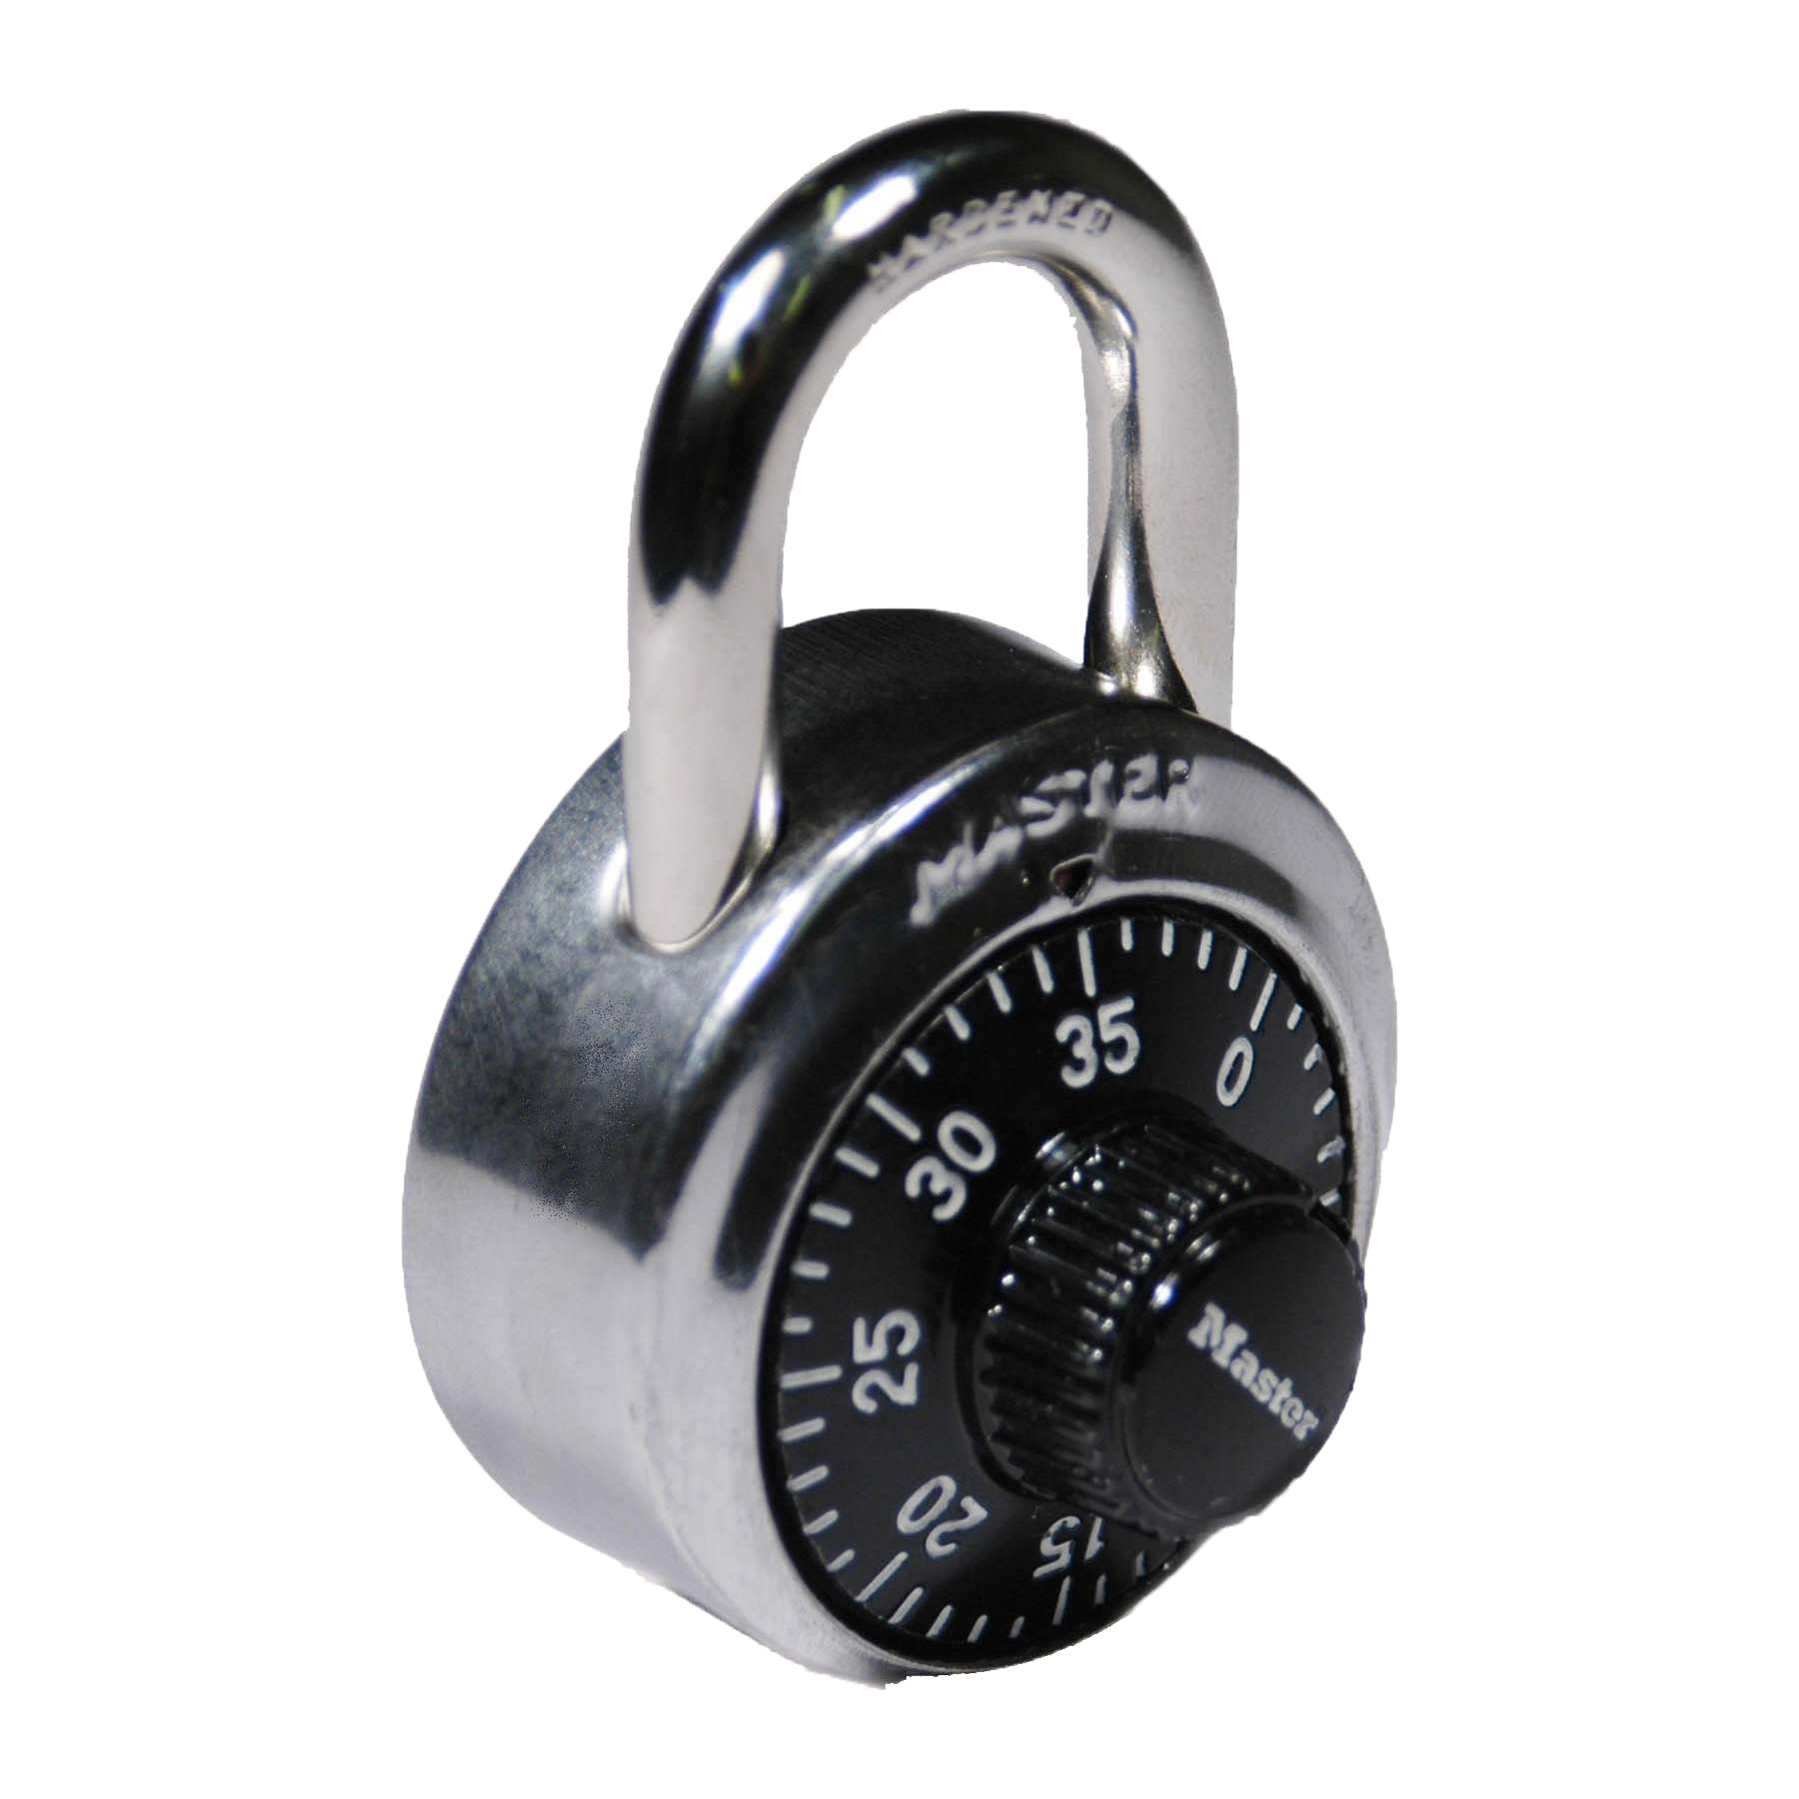 Master Lock 1525 General Security Combination Padlock With Key Control